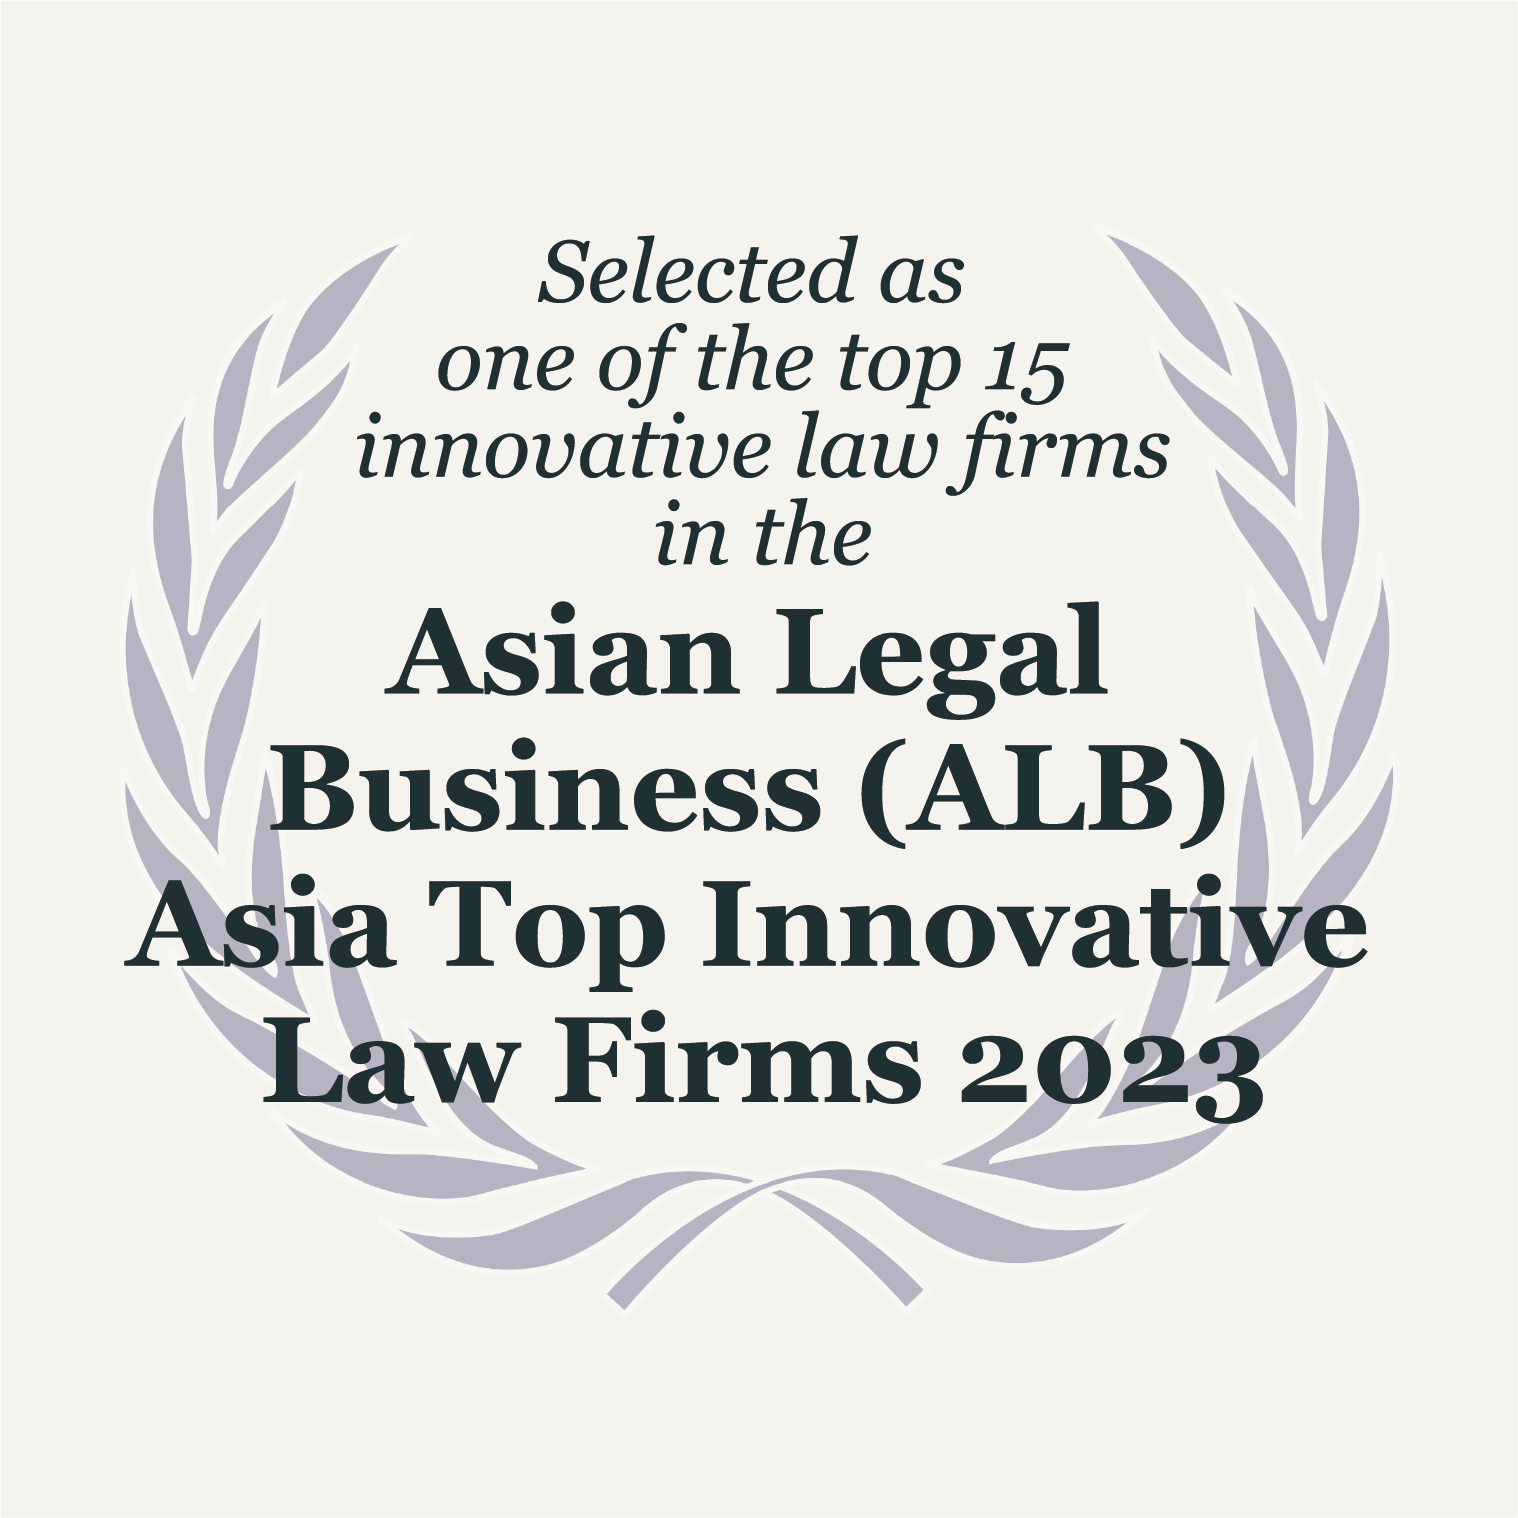 Atsumi & Sakai has received high evaluation in the ALB Asia Top Innovative Law Firms 2023